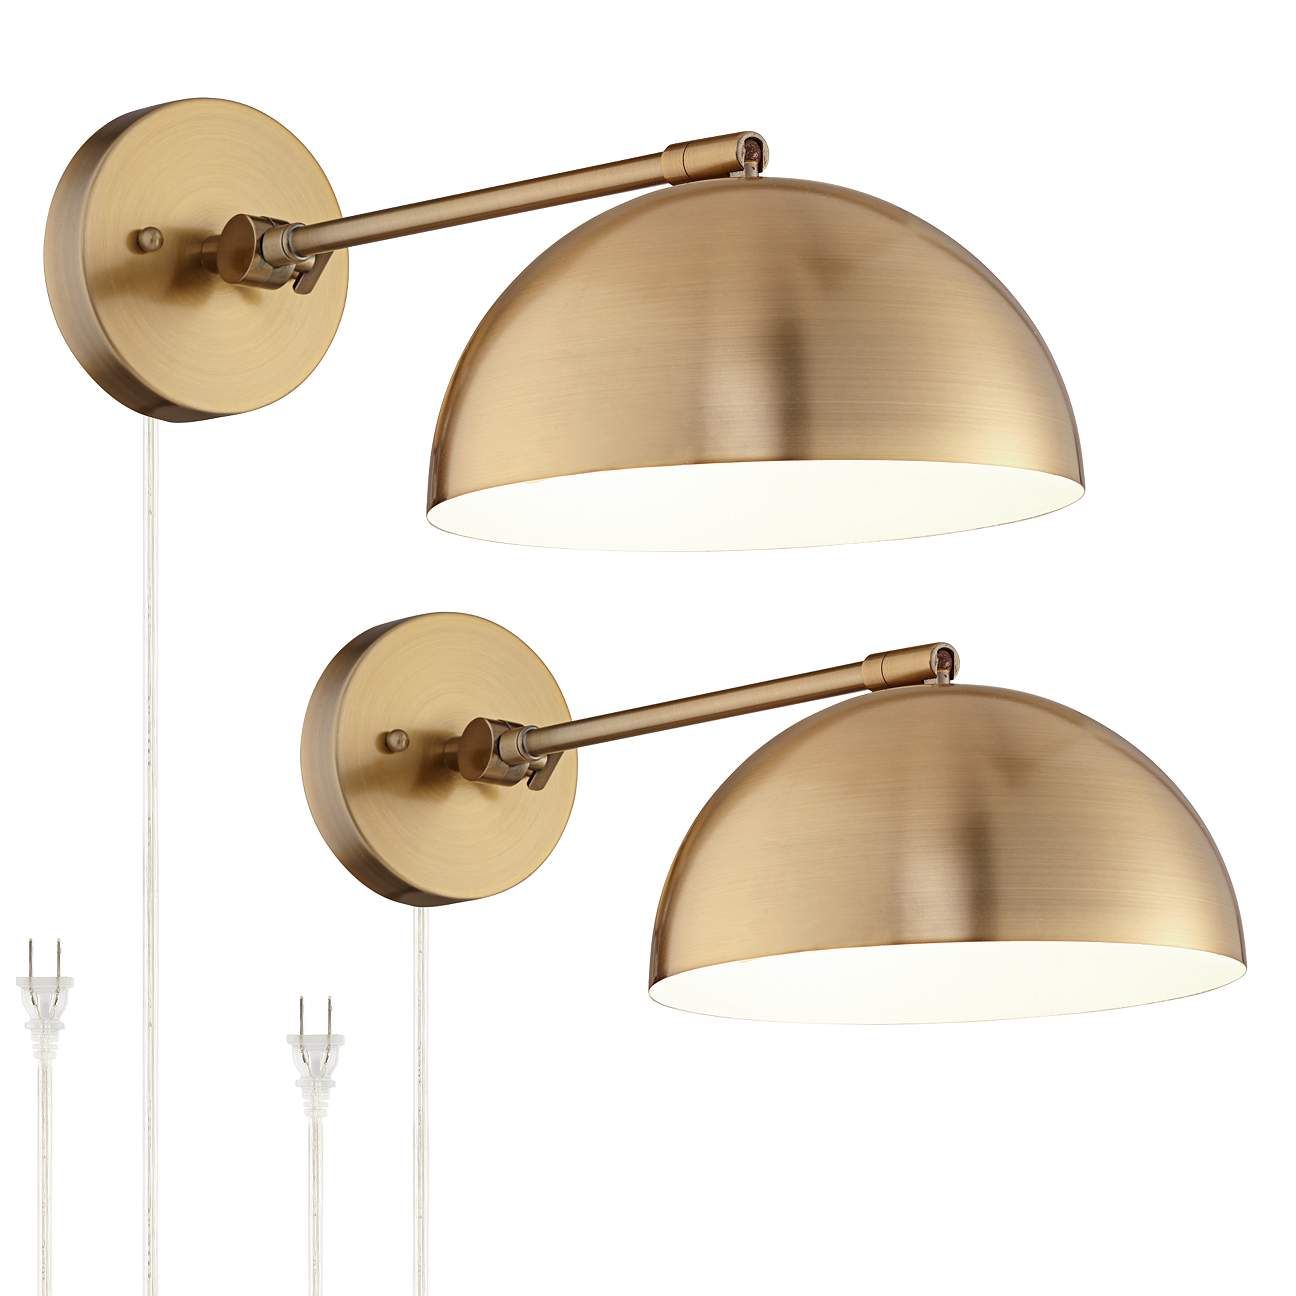 Brava Antique Brass Down-Light Plug-In Wall Lamps Set of 2 | Lamps Plus